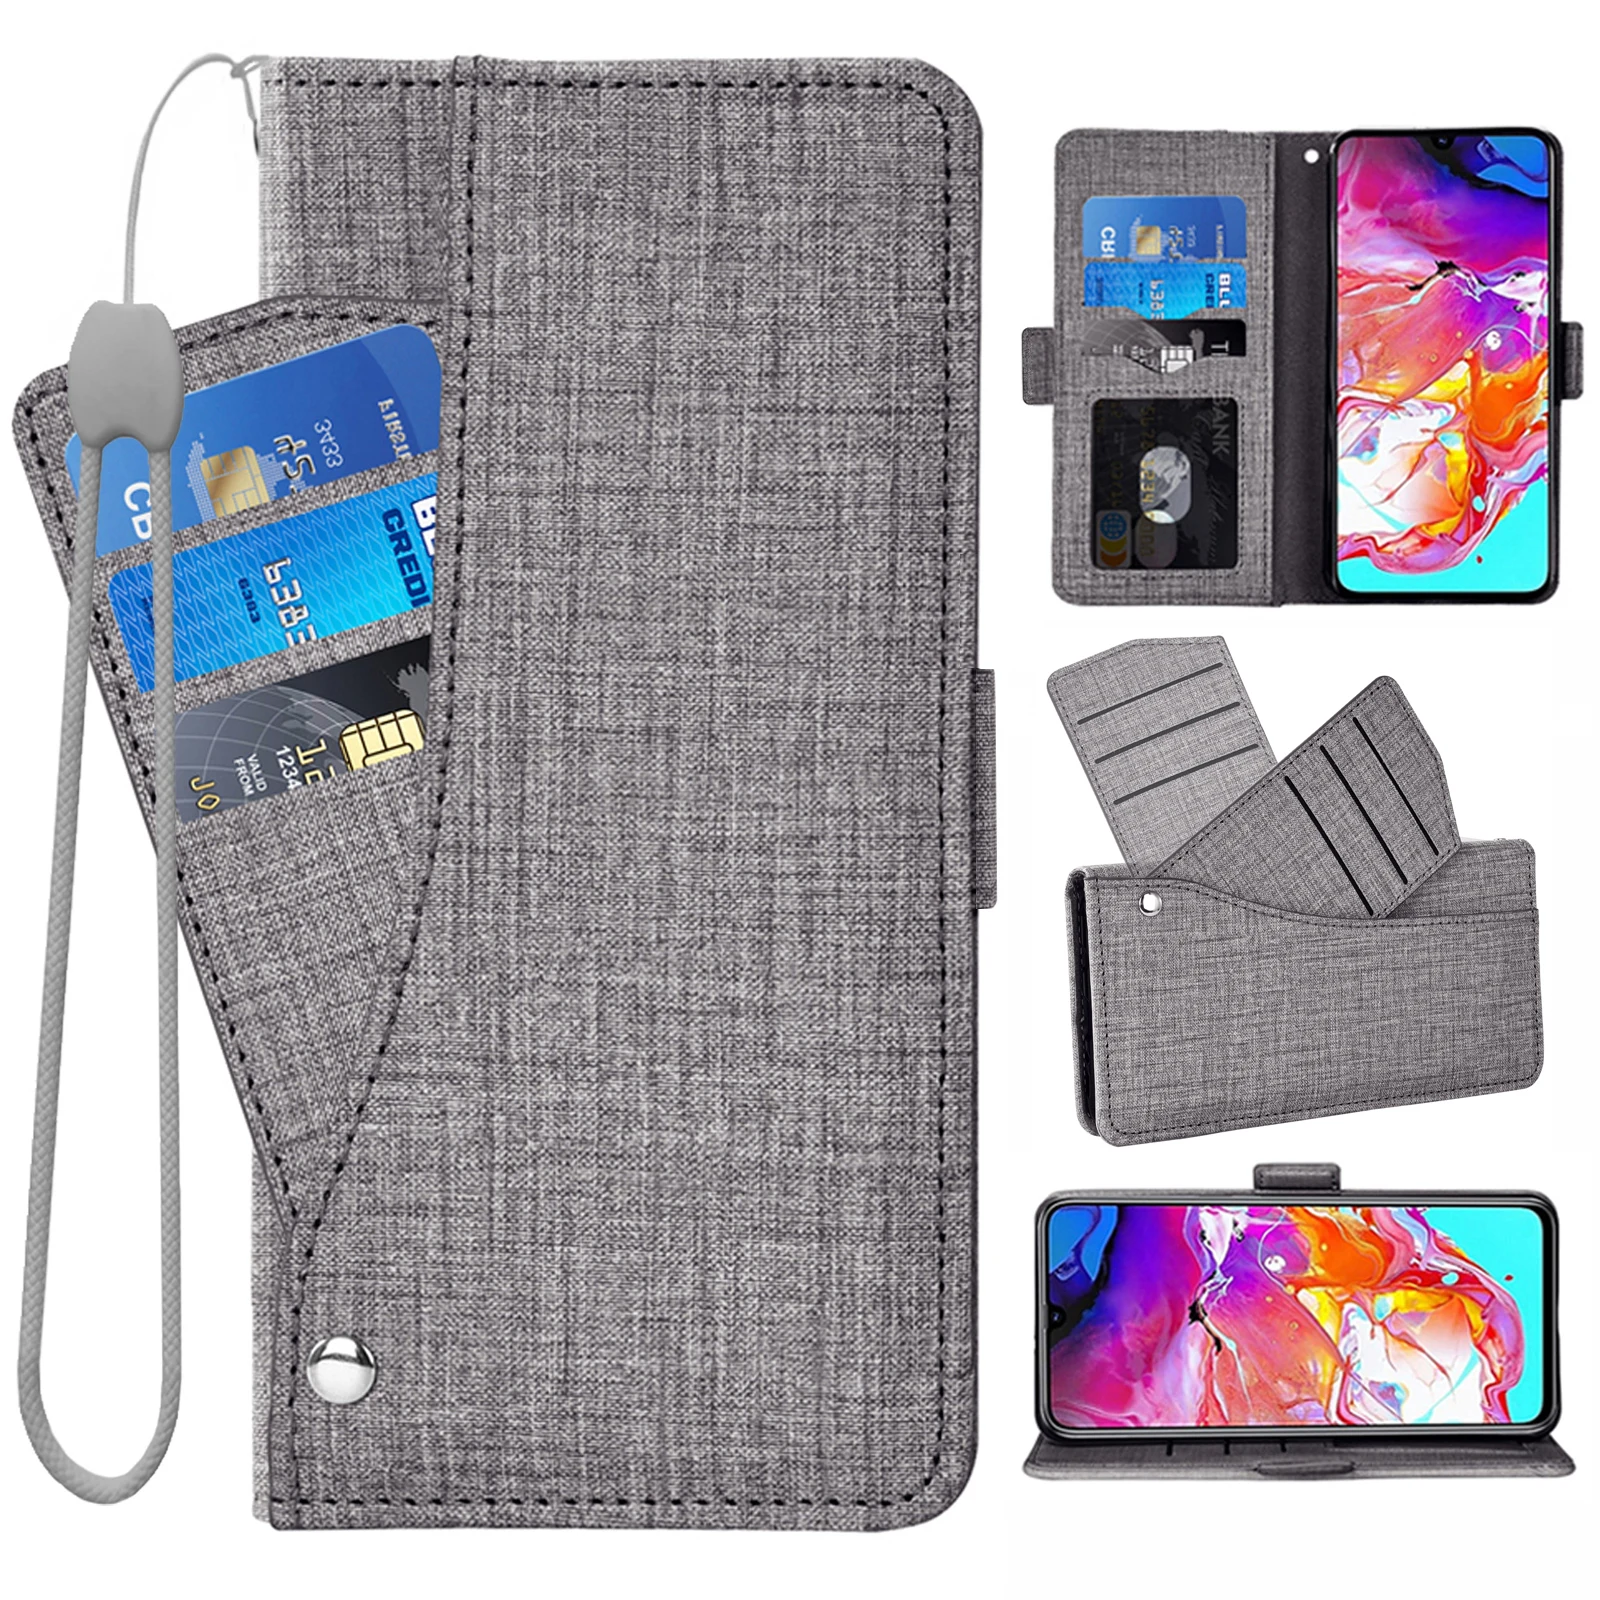 Proficiat Woning vragen Leather Flip Wallet Case For Samsung Galaxy S6 Edge Plus S 6 Magnetic Card  Holder Phone Cases For Samsung S6edge 6edge Cover - AliExpress